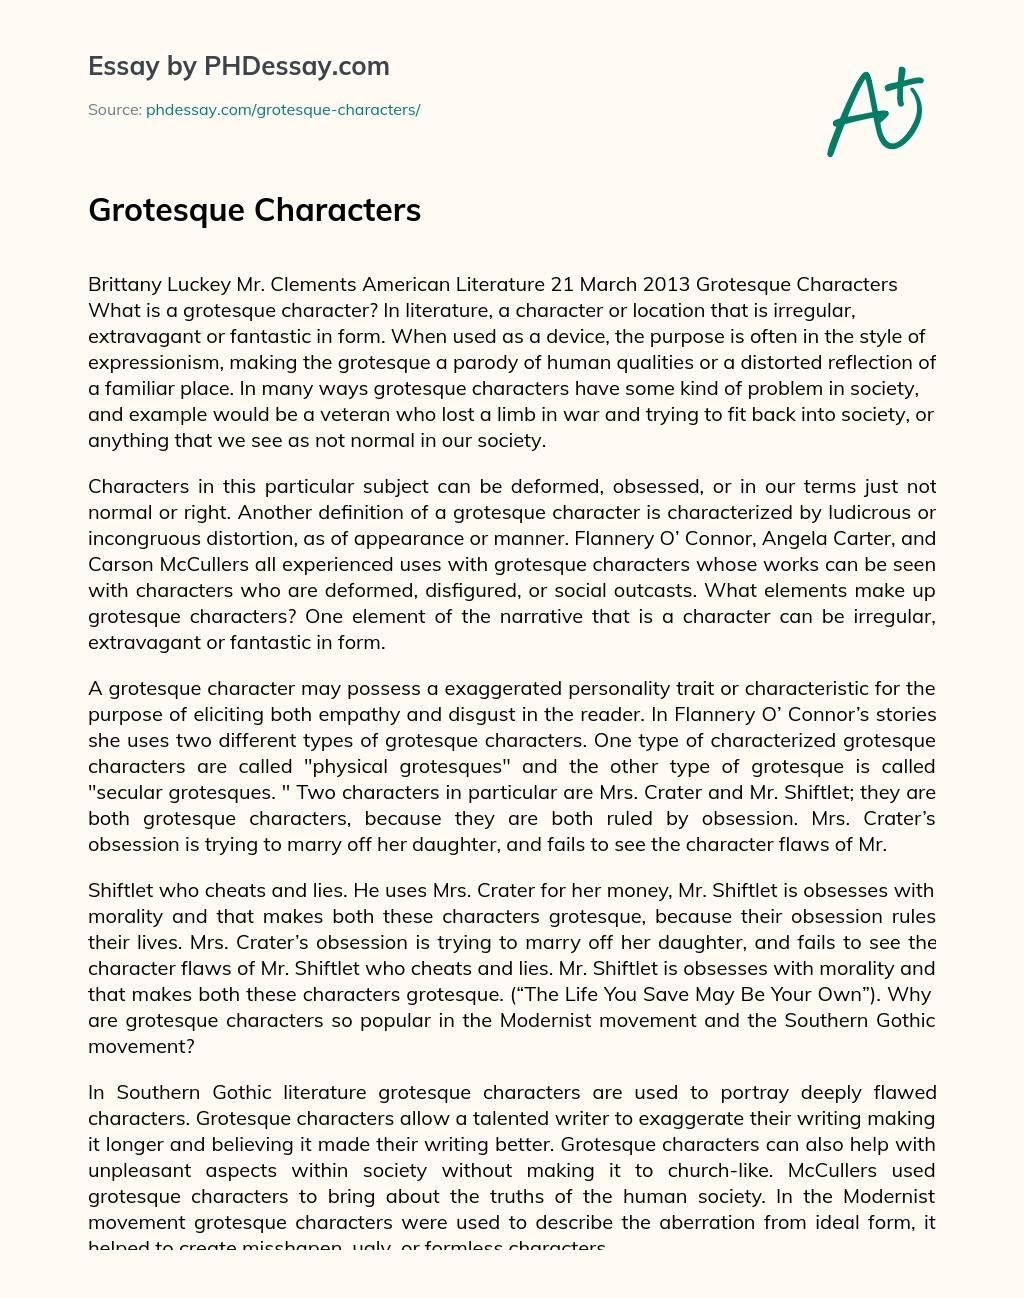 Grotesque Characters essay